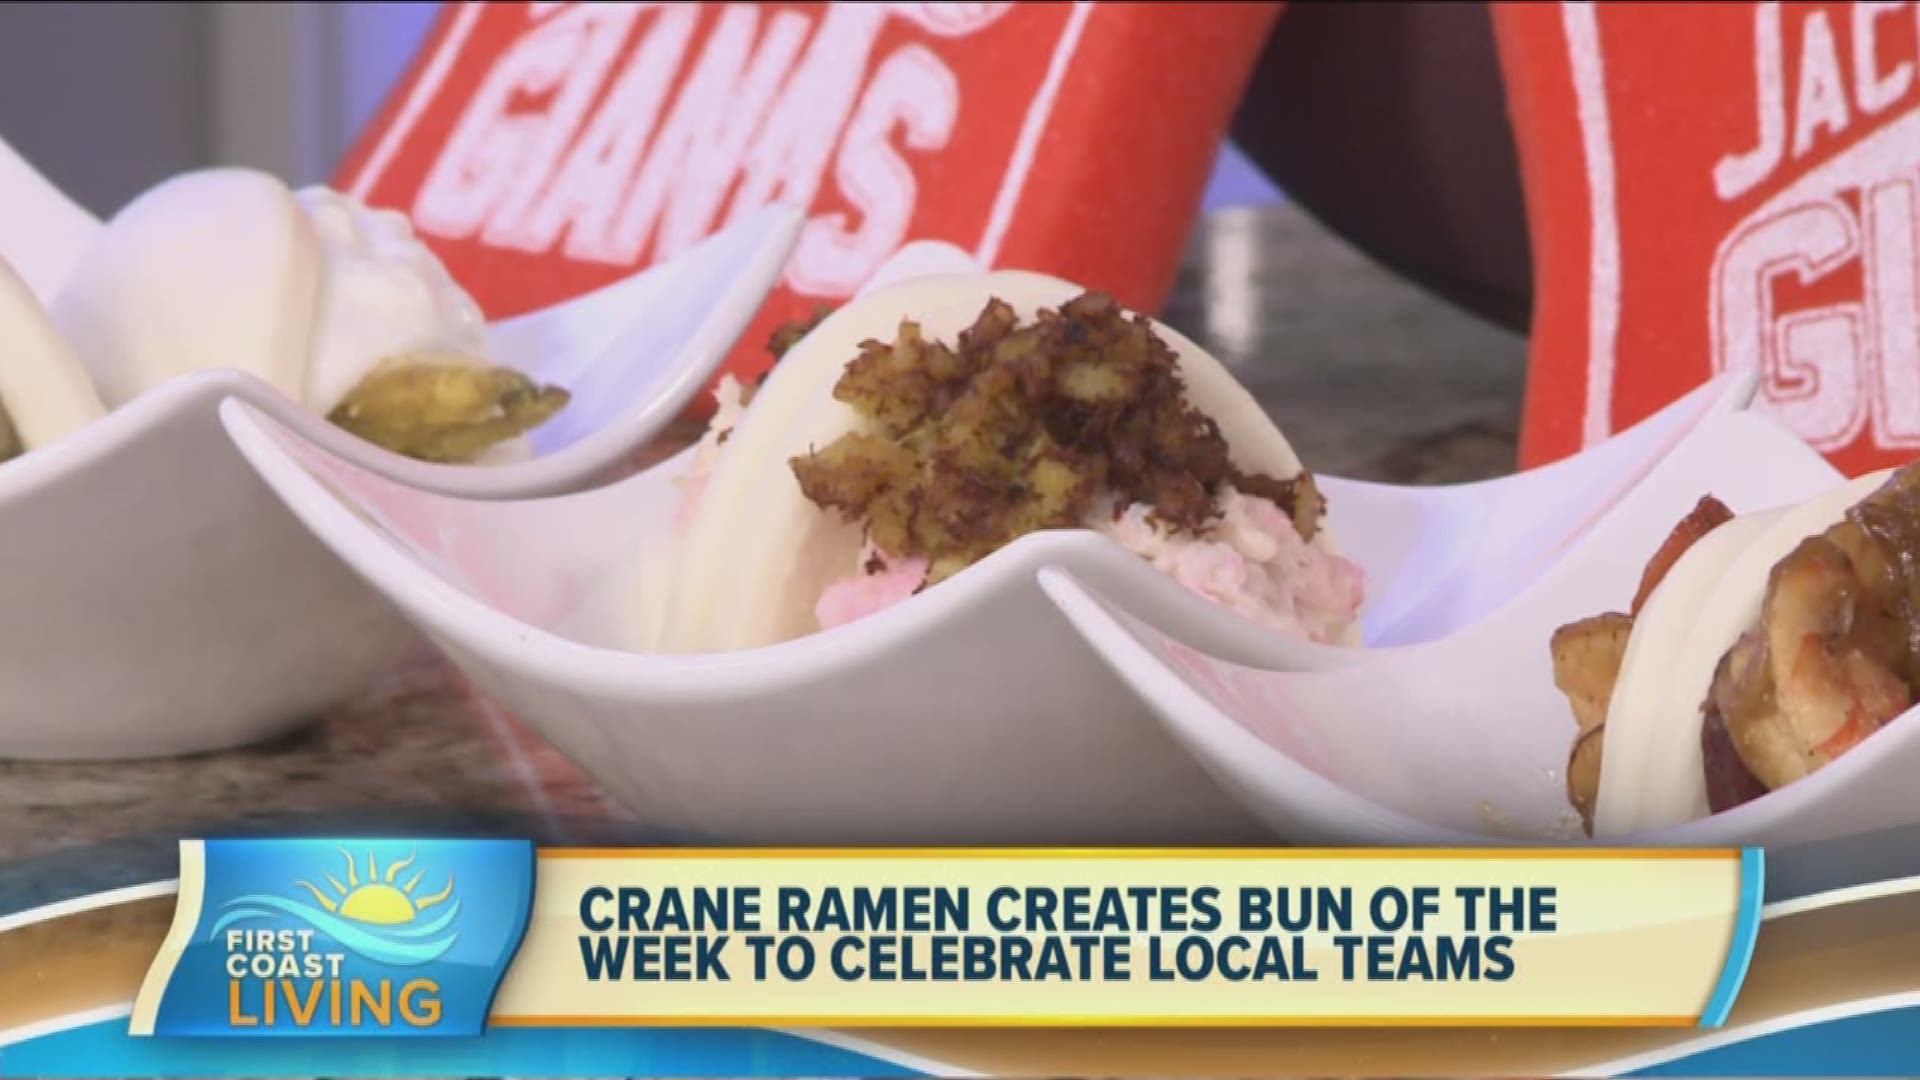 If you love supporting your local sports teams, don't miss out on the special running for the next eight weeks at Crane Ramen!